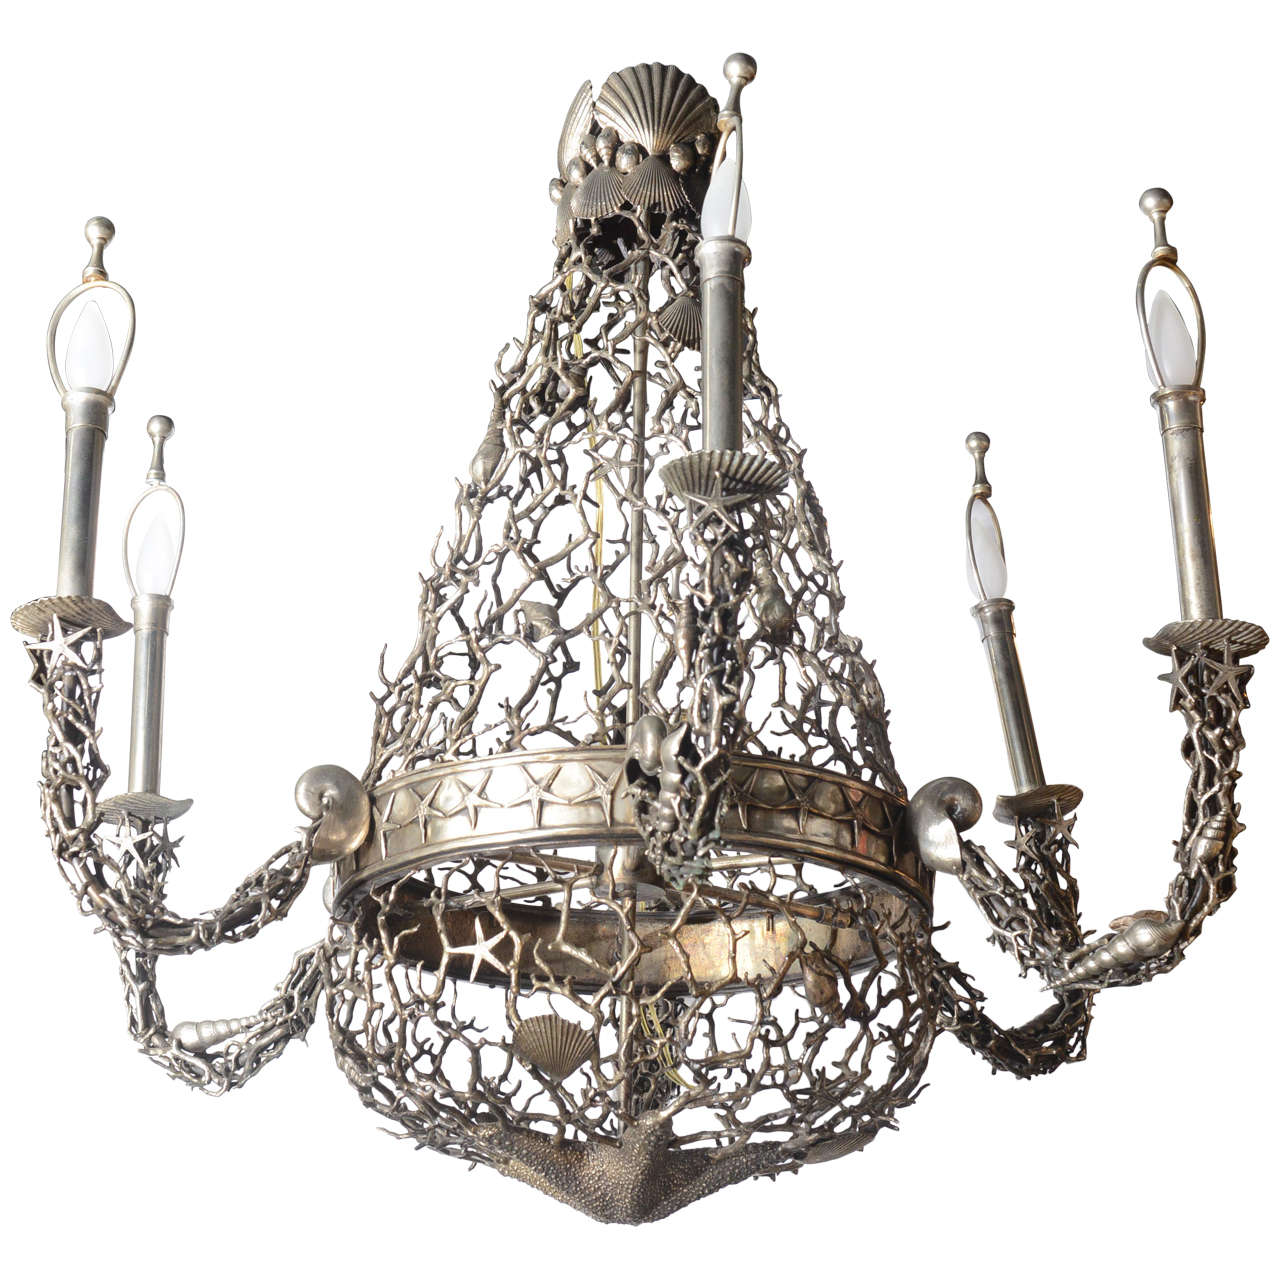 Silver Plated Coral and Seashell Chandelier